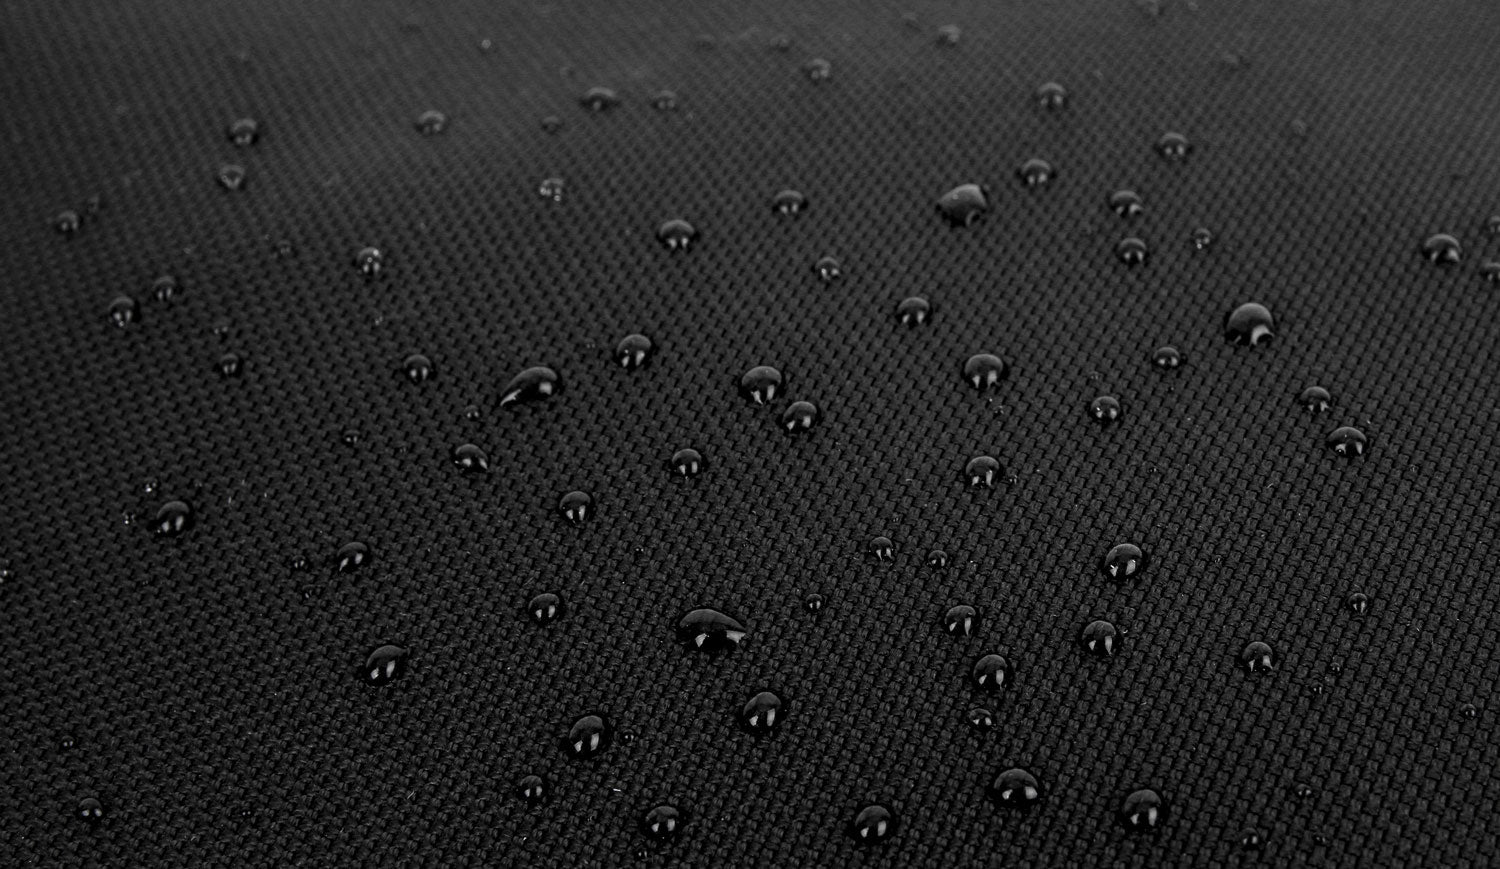 ANTI-MICROBIAL, WATER REPELLENT & LIGHTWEIGHT DURACELTEX FABRIC